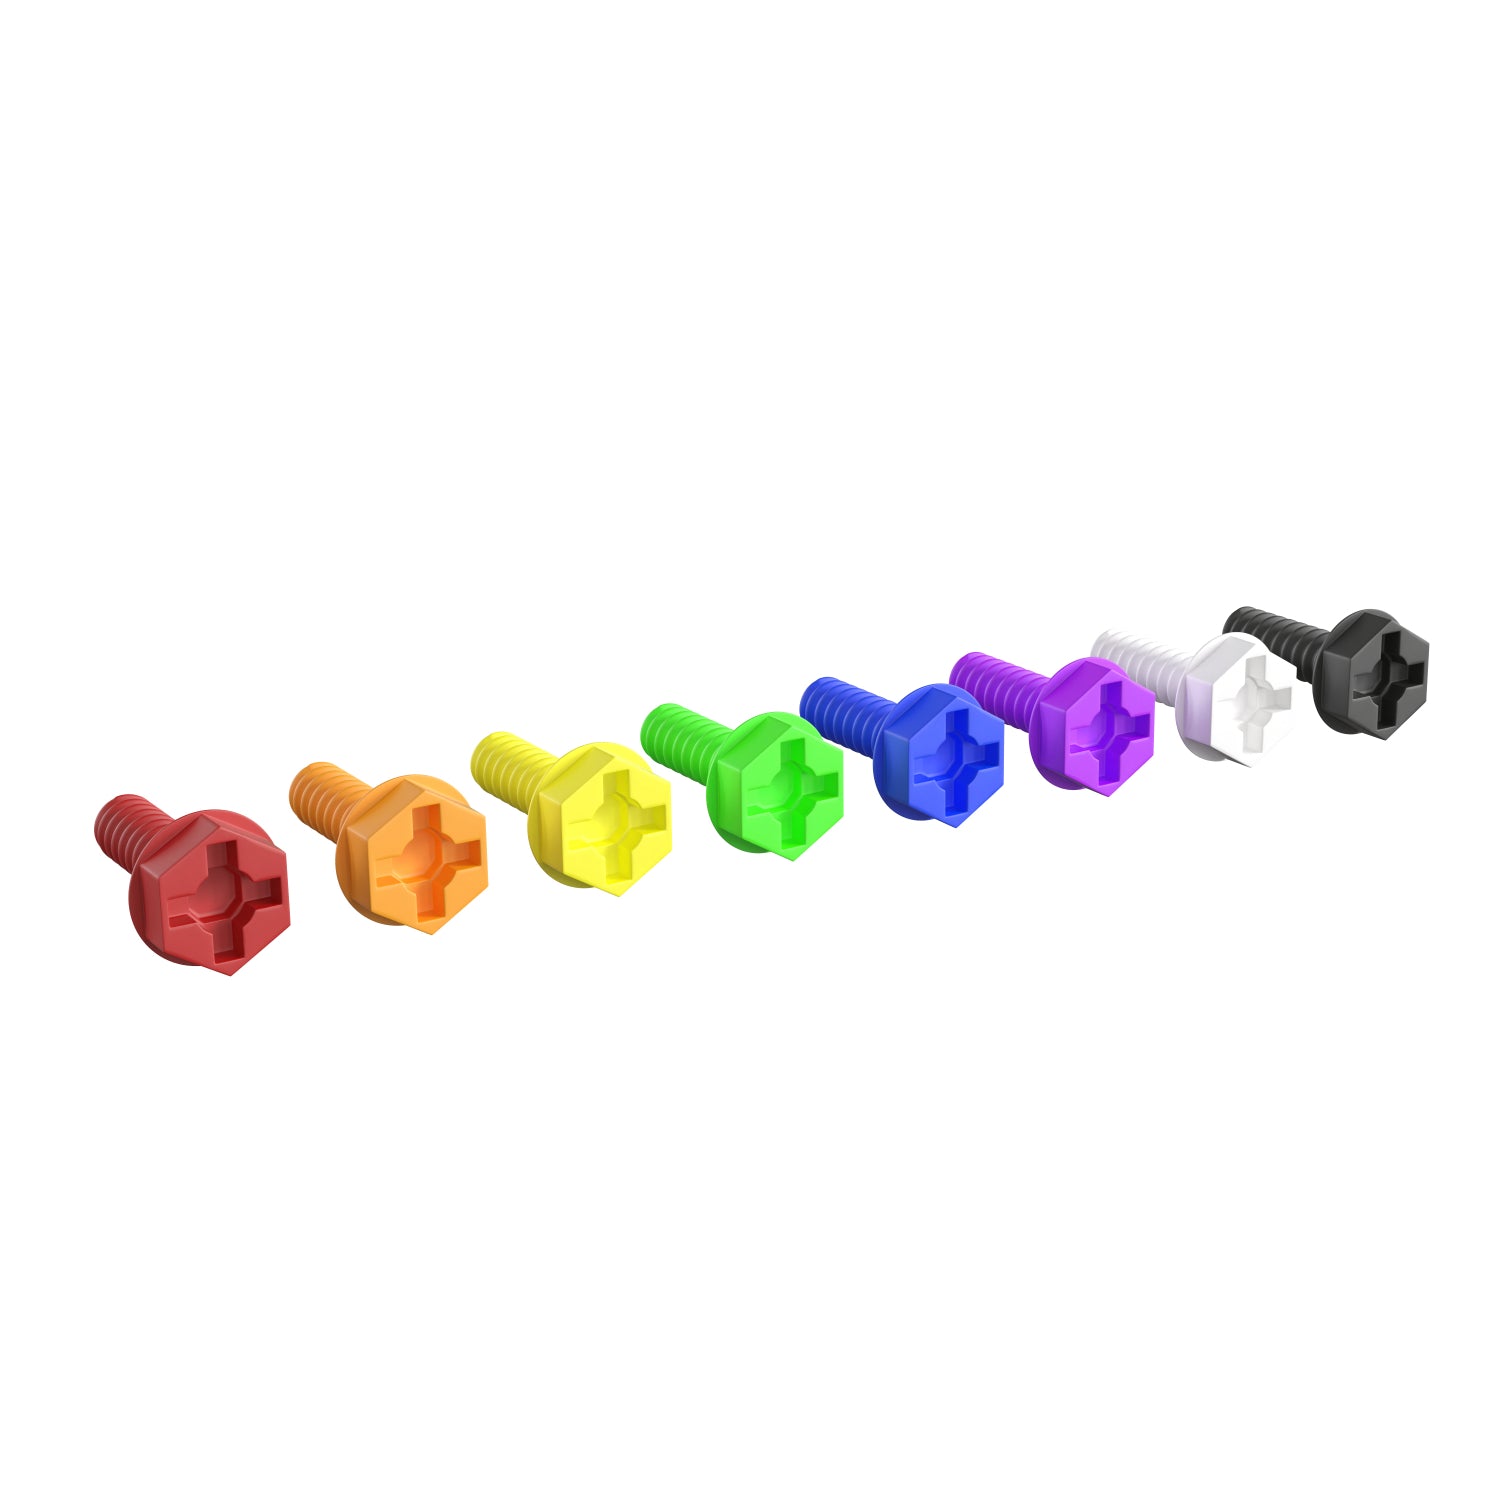 Bright Beginnings Commercial Grade Modular STEAM Wall 512 Piece Multicolor Screw Accessory Pack